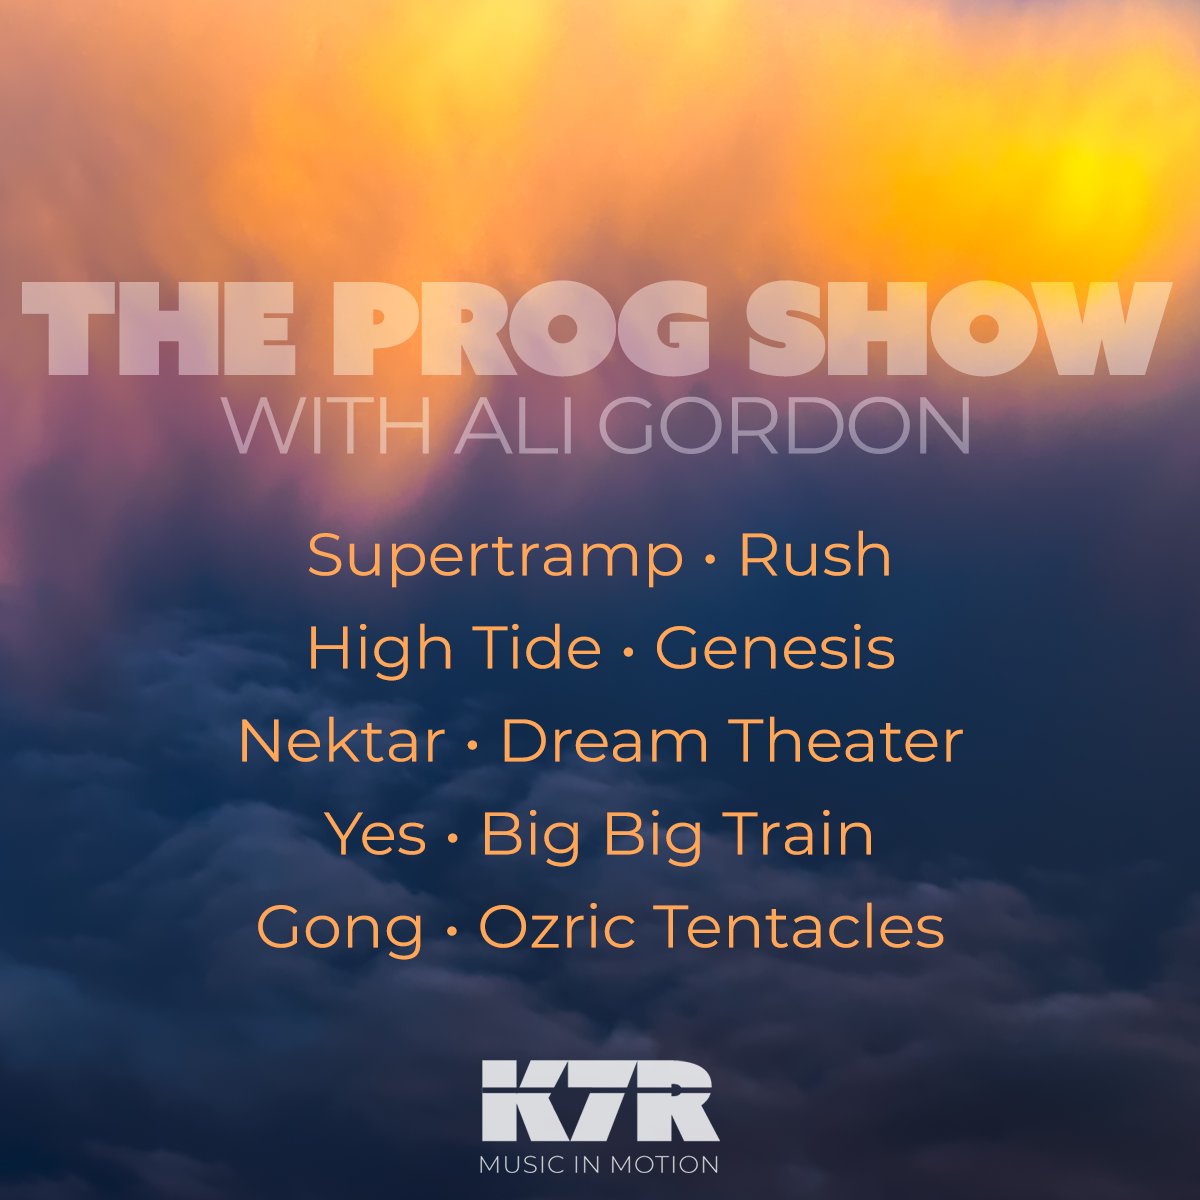 Tonight from 10 pm - @Mrspins is live with the K7R Prog show. Two hours of top Progressive Rock from Genesis, Supertramp, Big Big Train, Muse, Pink Floyd and many more.